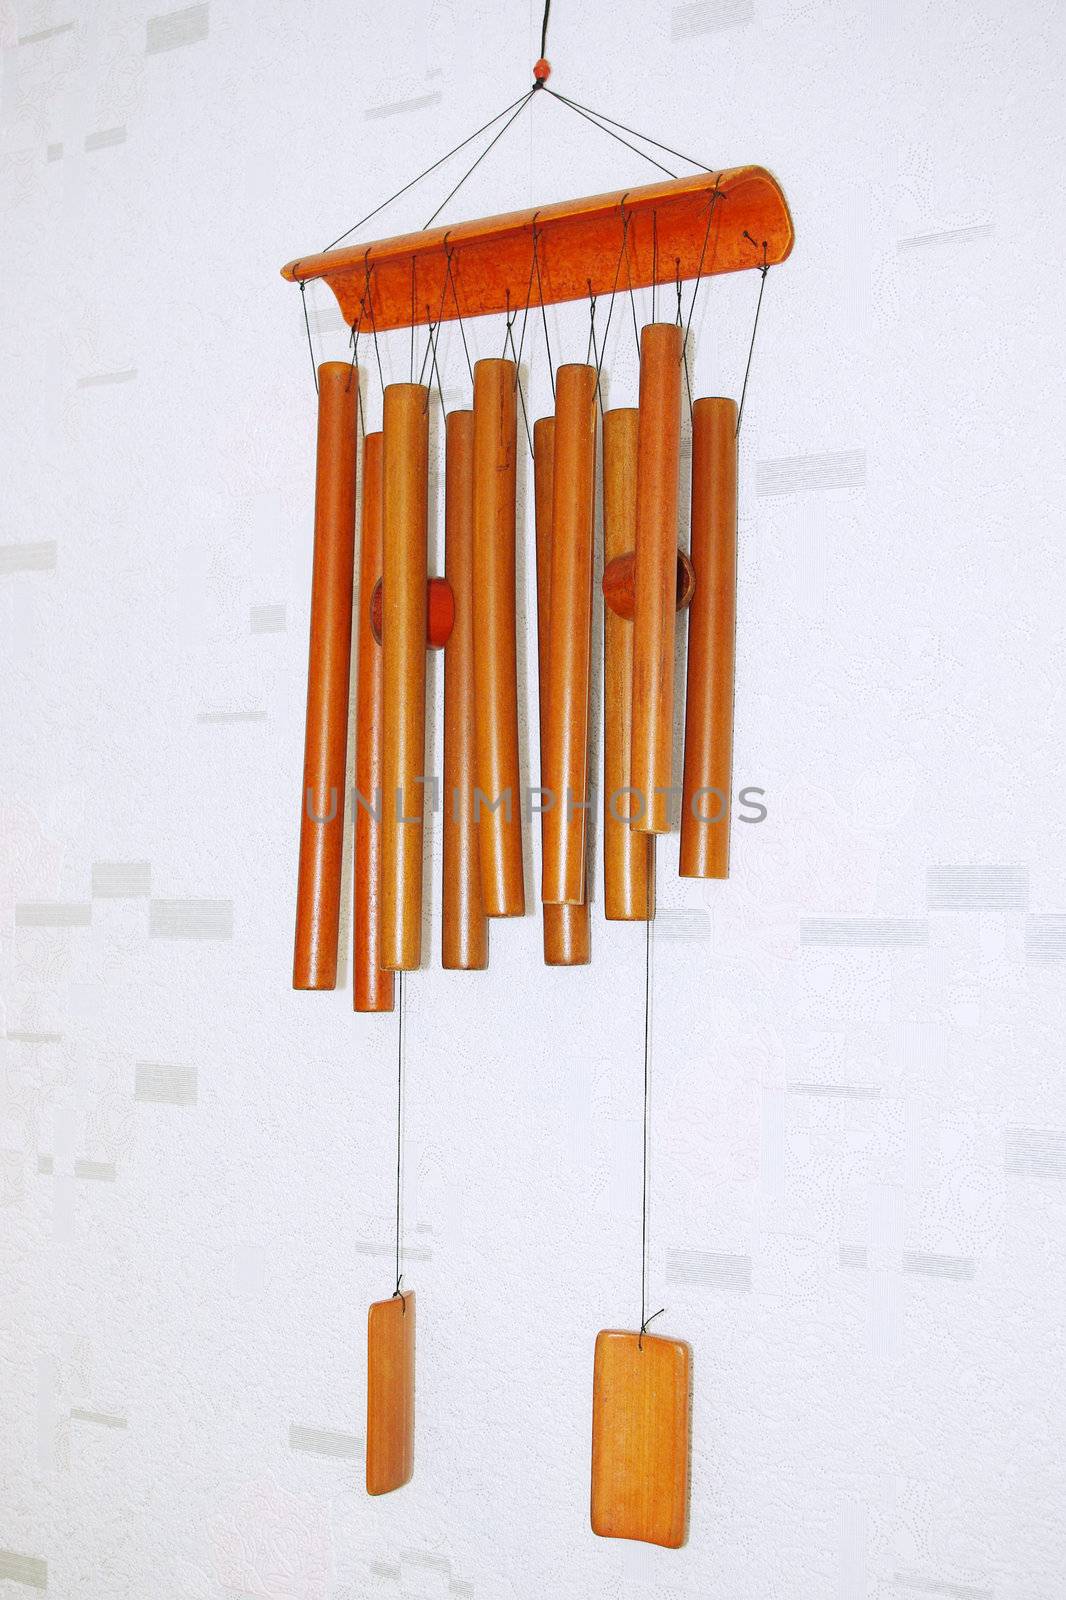 bamboo wind chimes hanging on the wall